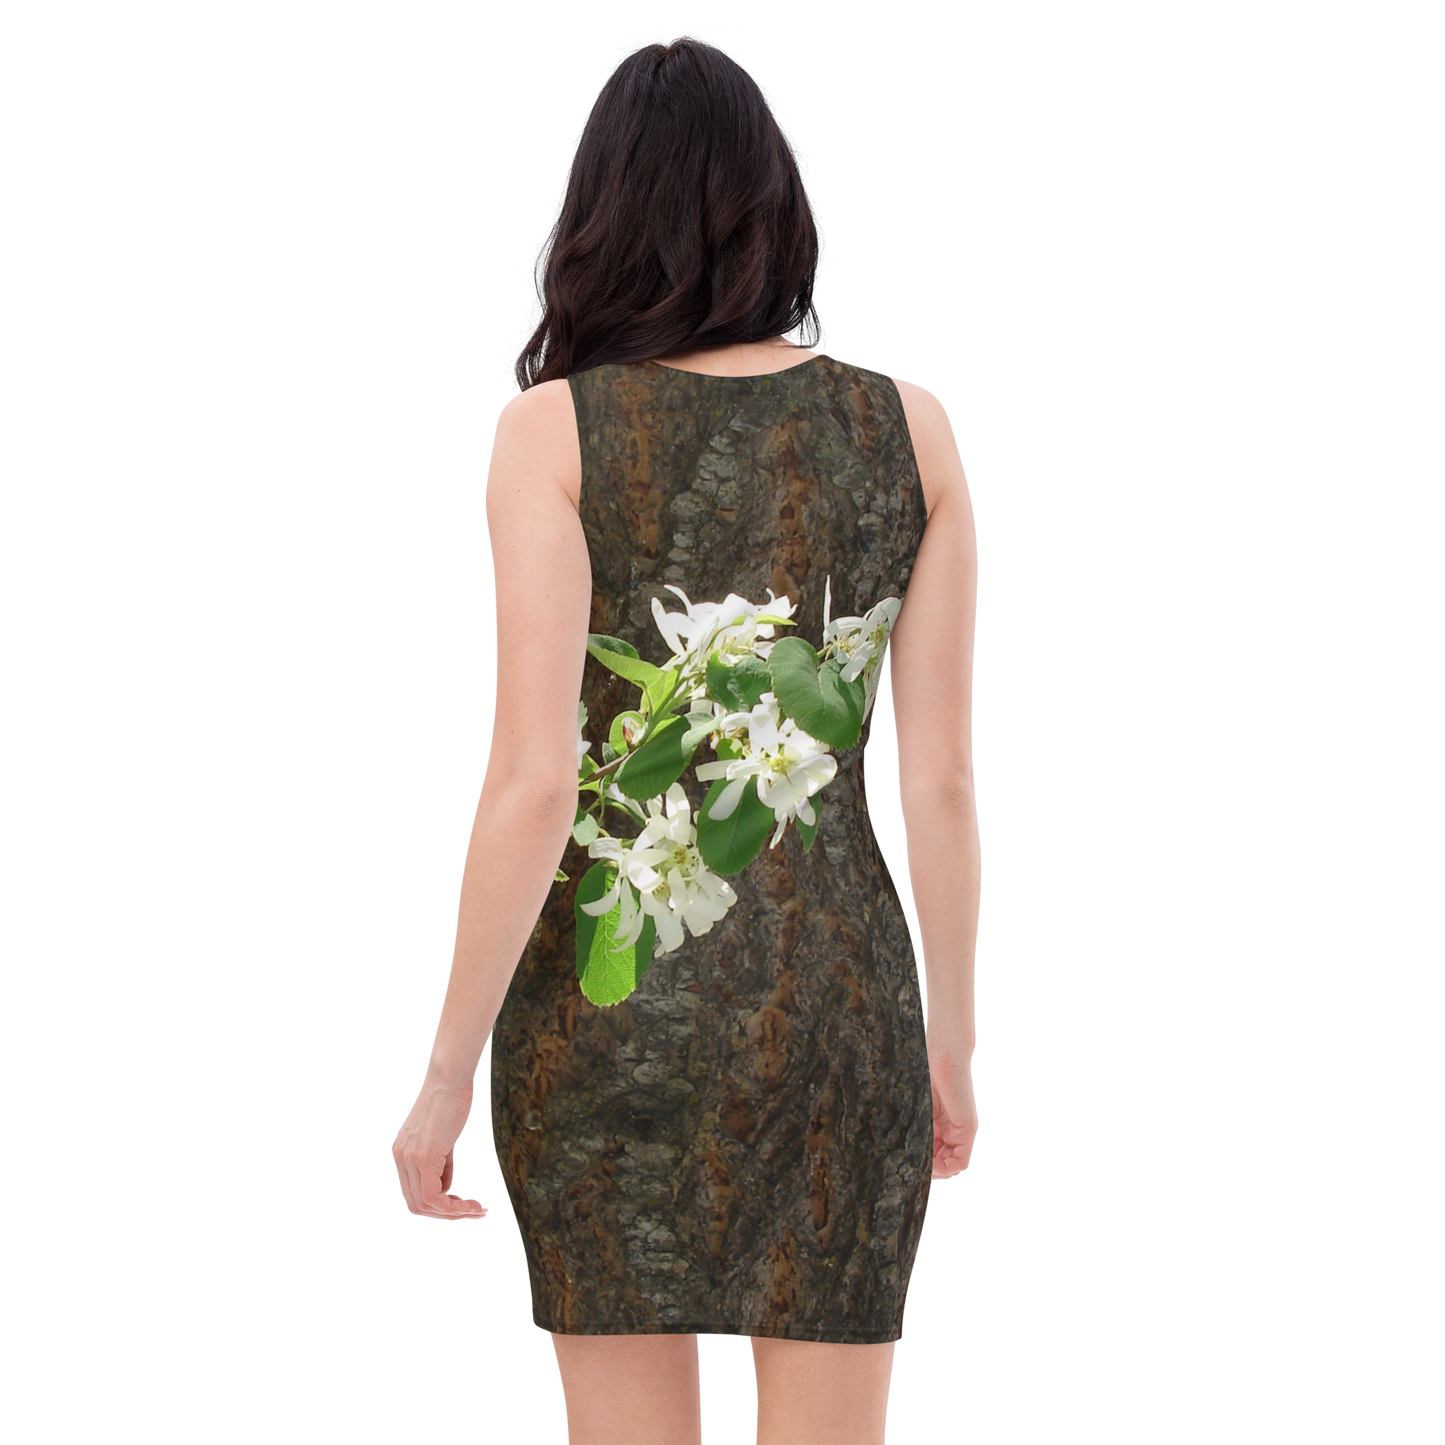 The EARTH LOVE Collection - "Bark & Blossom Bliss" Design Tank Dress